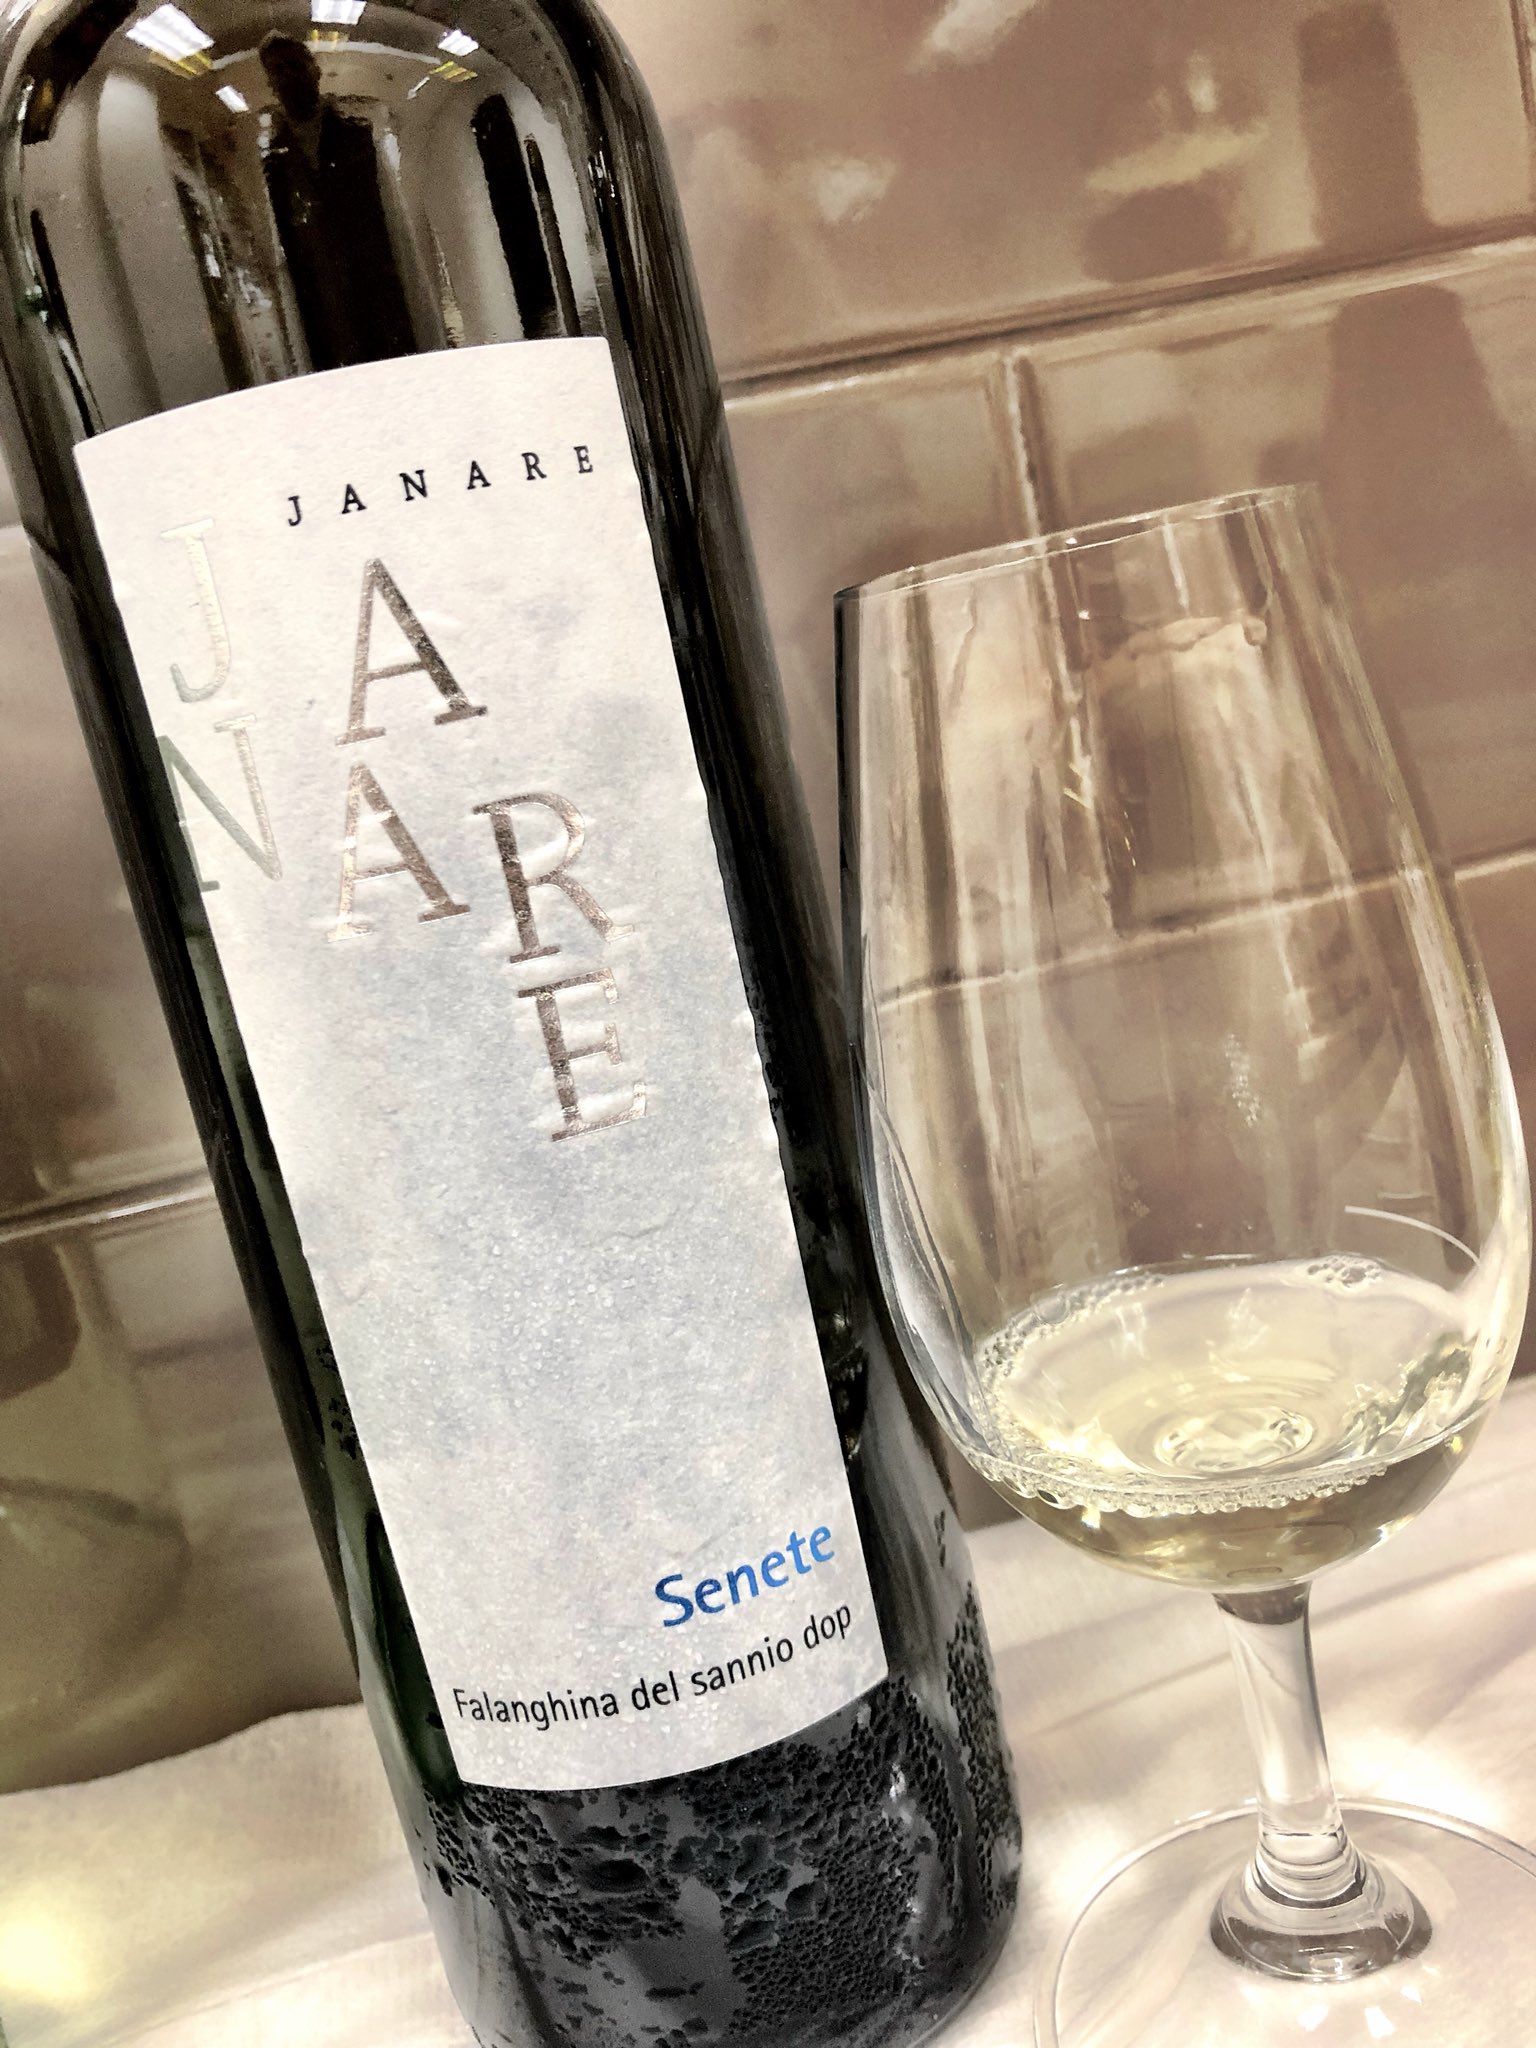 Do you love wines from #Campania as much as I do? Then this one! Janare #Falanghina $18.95 hunts of apricot and crisp acidity with a certain minerality that dances nicely through the palate. Try it with spicy calamari! #LCBO #Wine #WineTasting #Toronto #Lifestyle https://t.co/575zLvHMYc